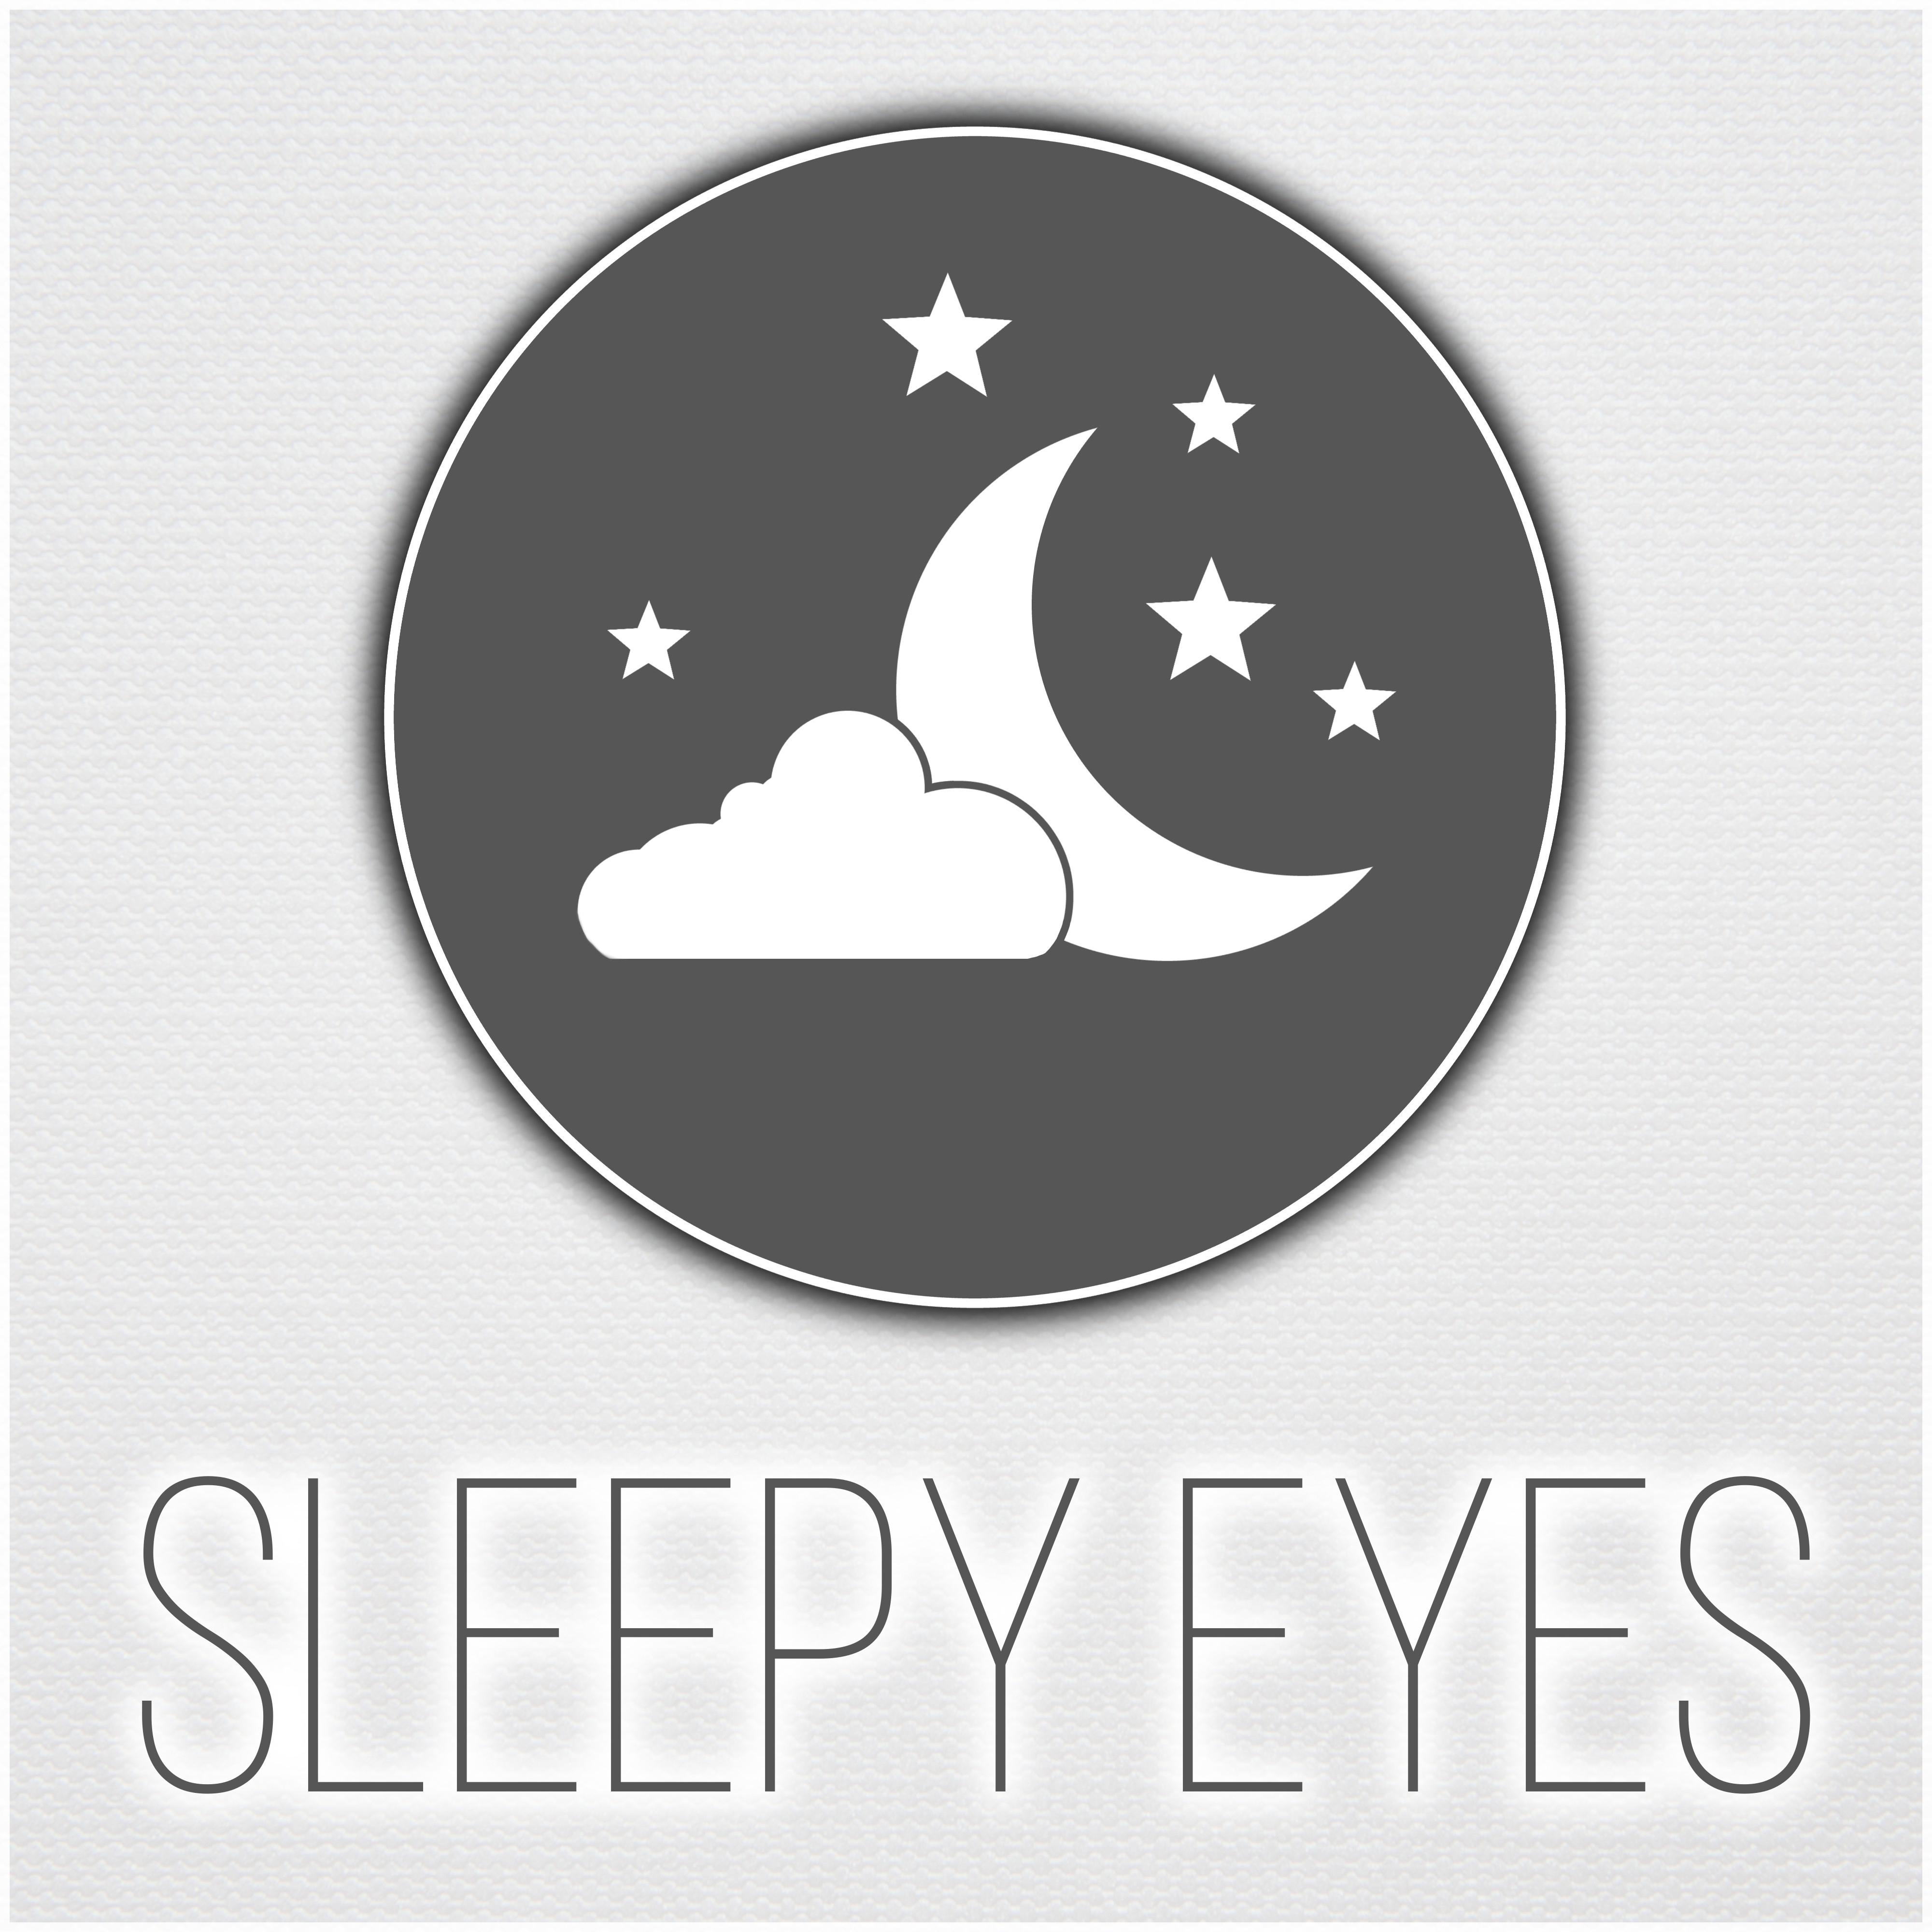 Sleepy Eyes - Dream, Nap Nature Sounds, Calmness, Lullaby, Relaxation, Sleep Therapy